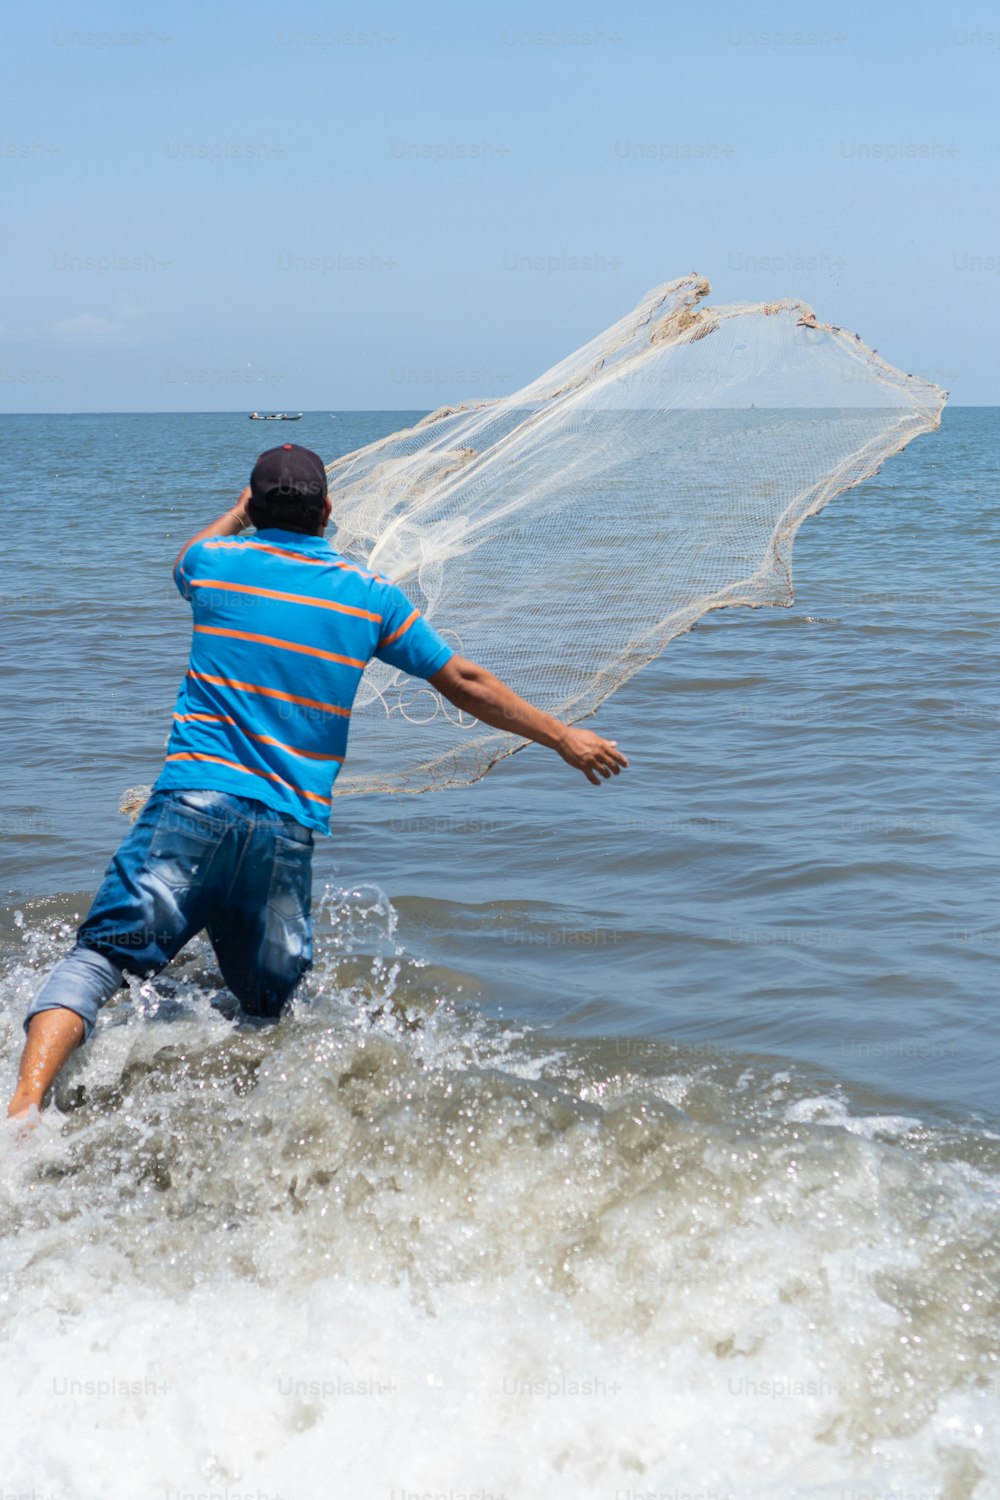 Fisher on the beach casting a fishing net